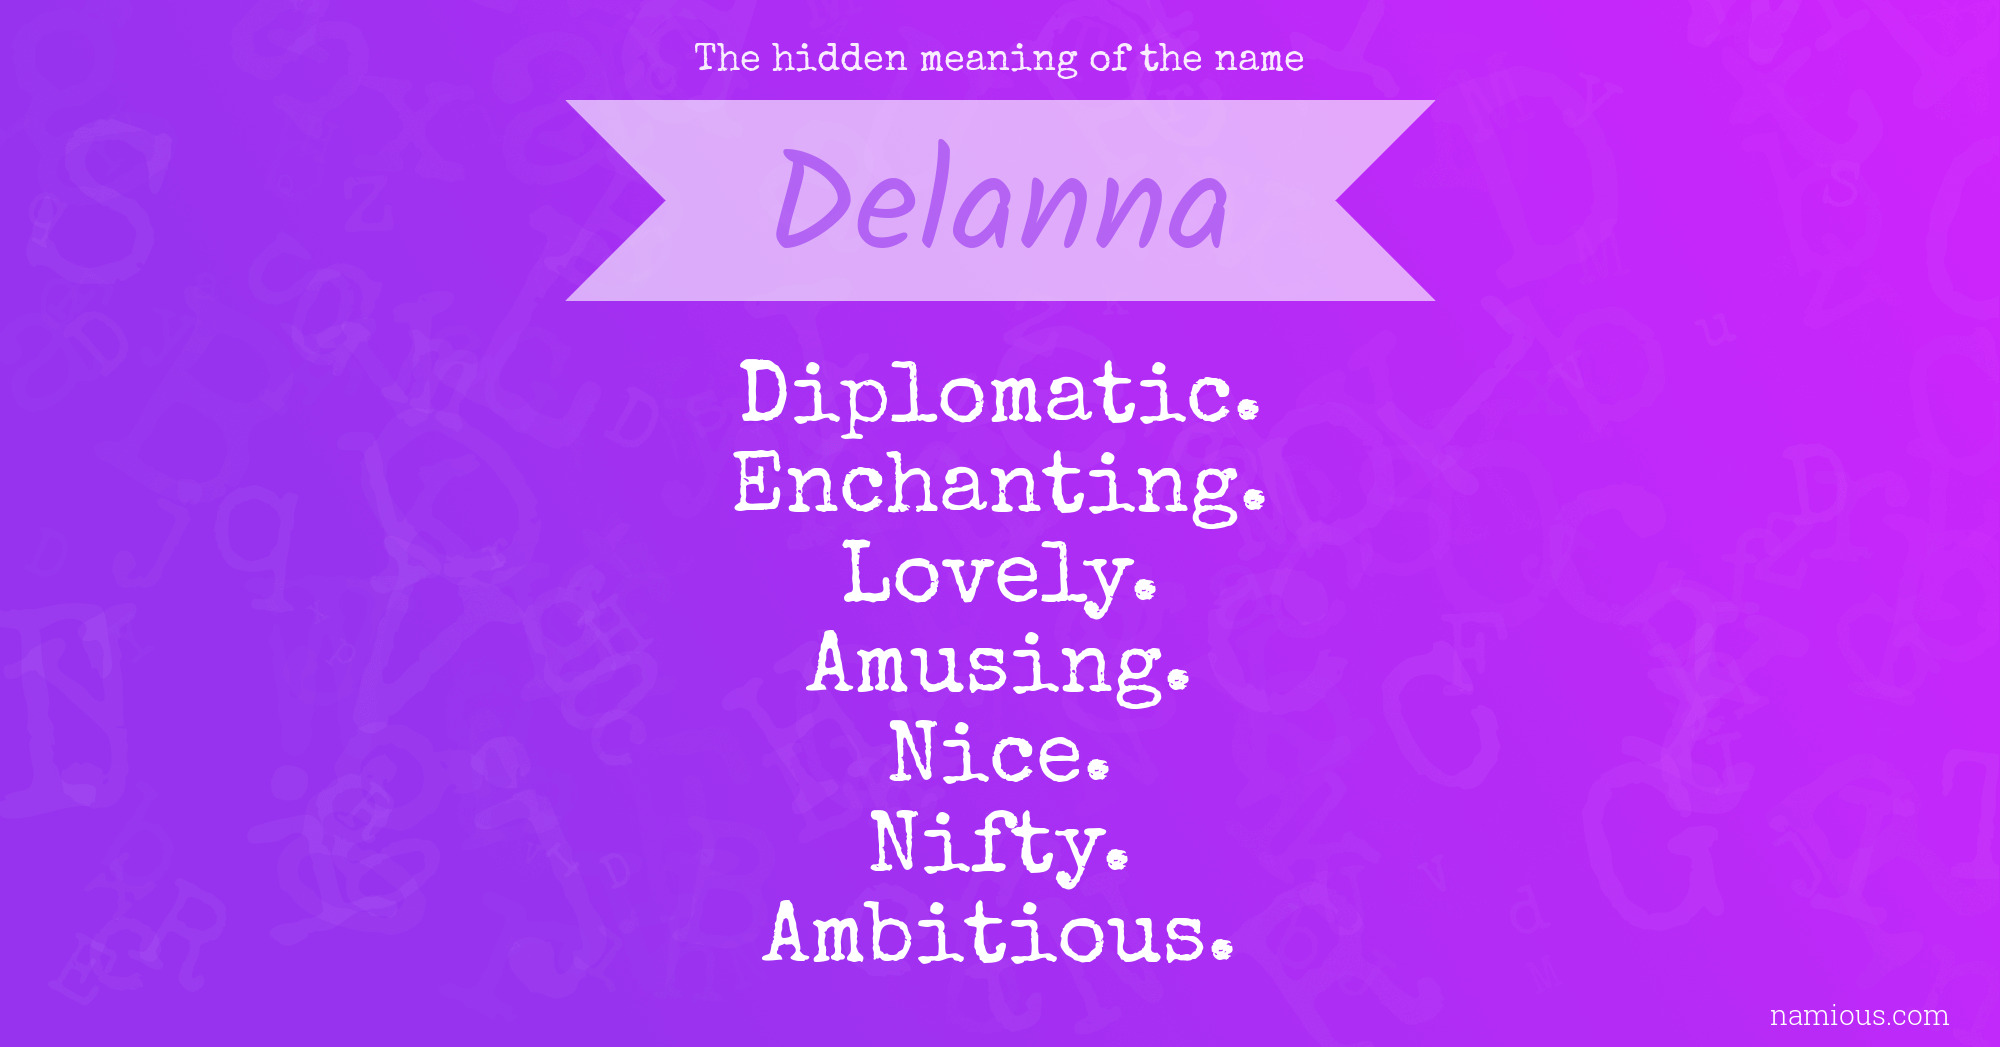 The hidden meaning of the name Delanna